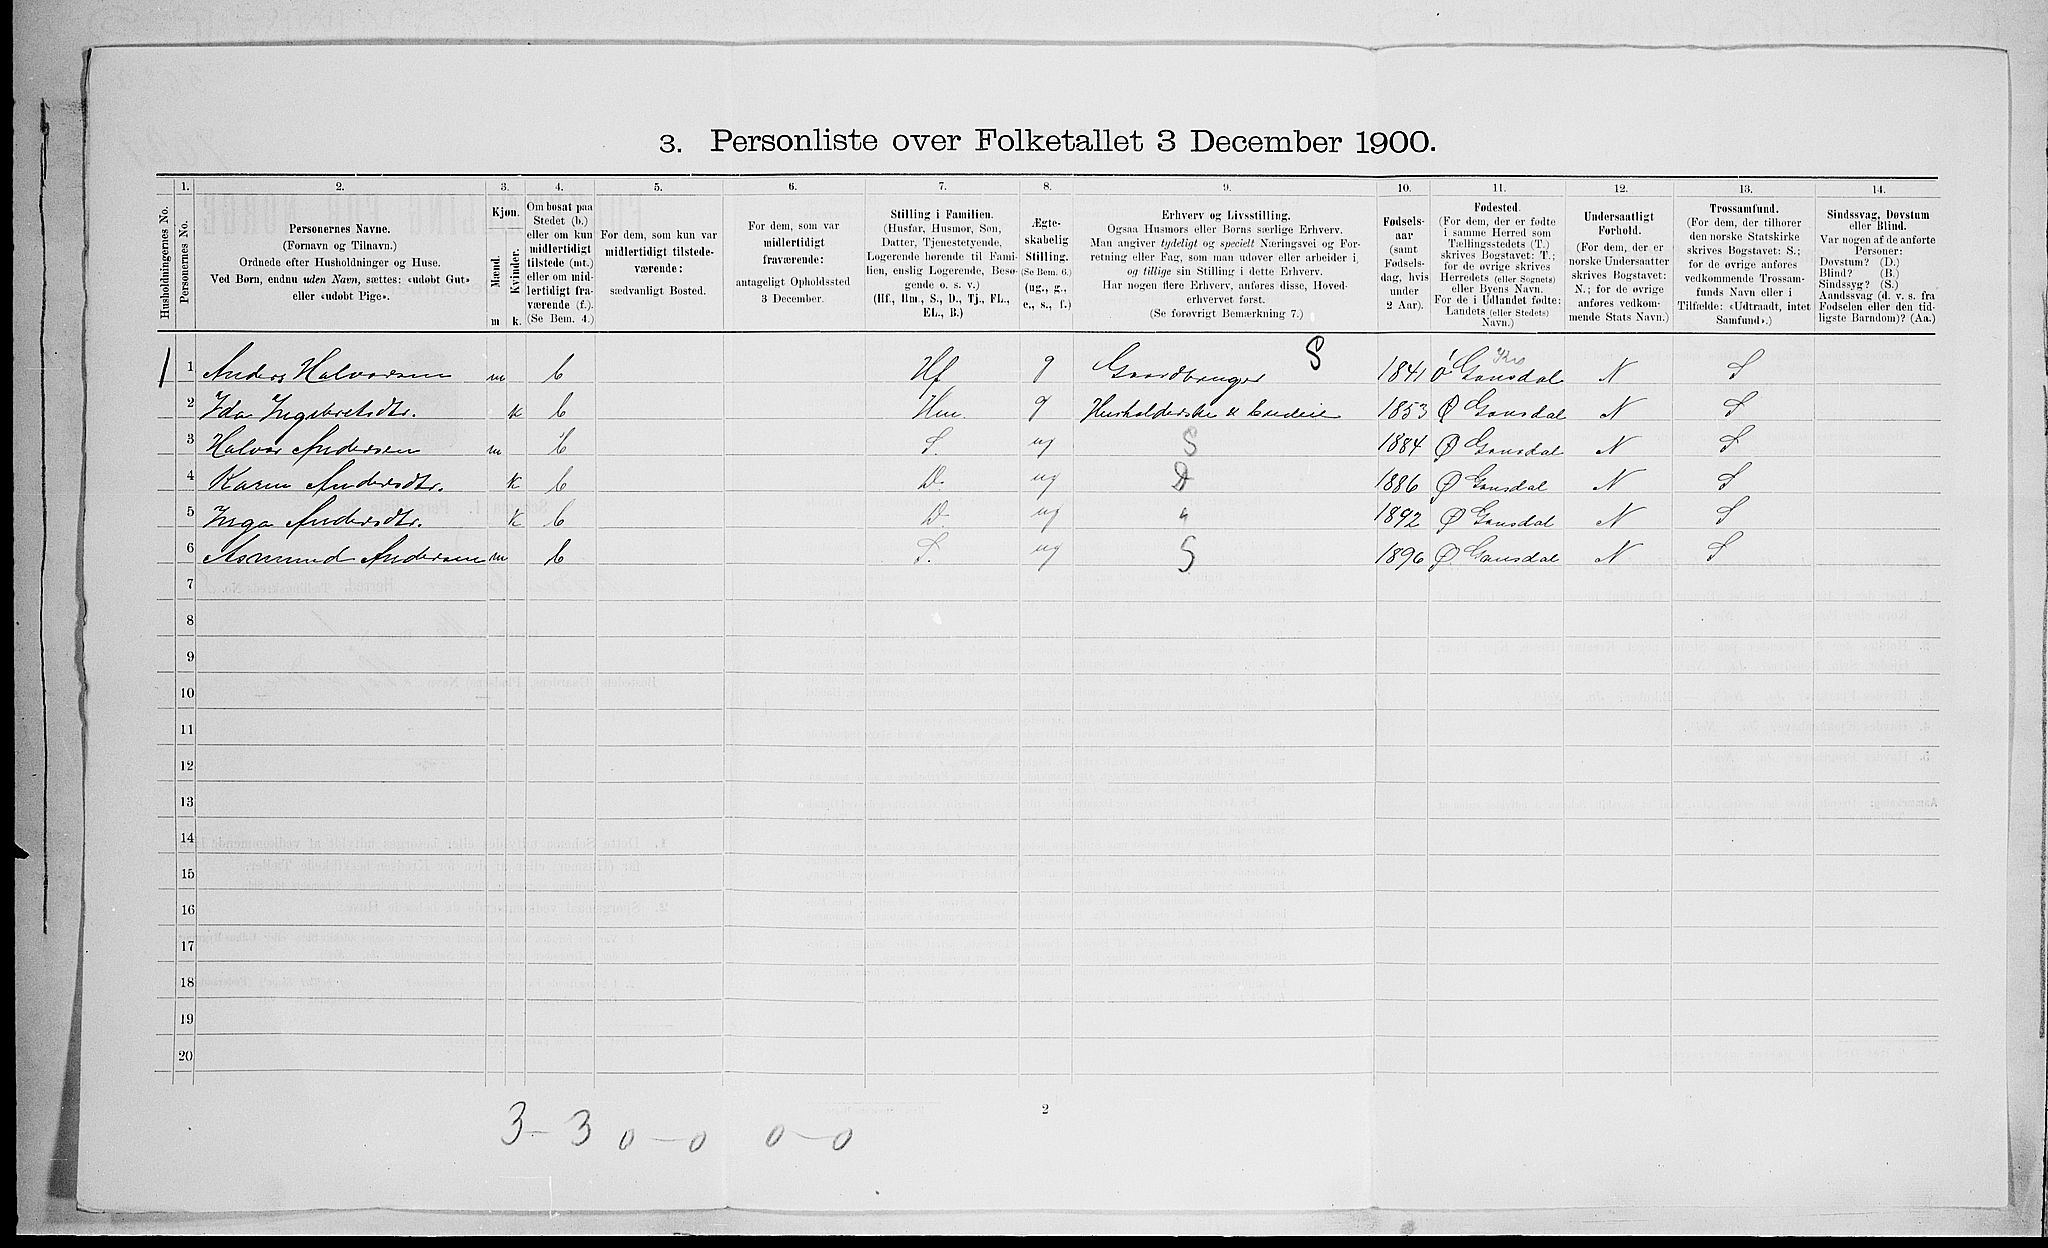 SAH, 1900 census for Nord-Fron, 1900, p. 96